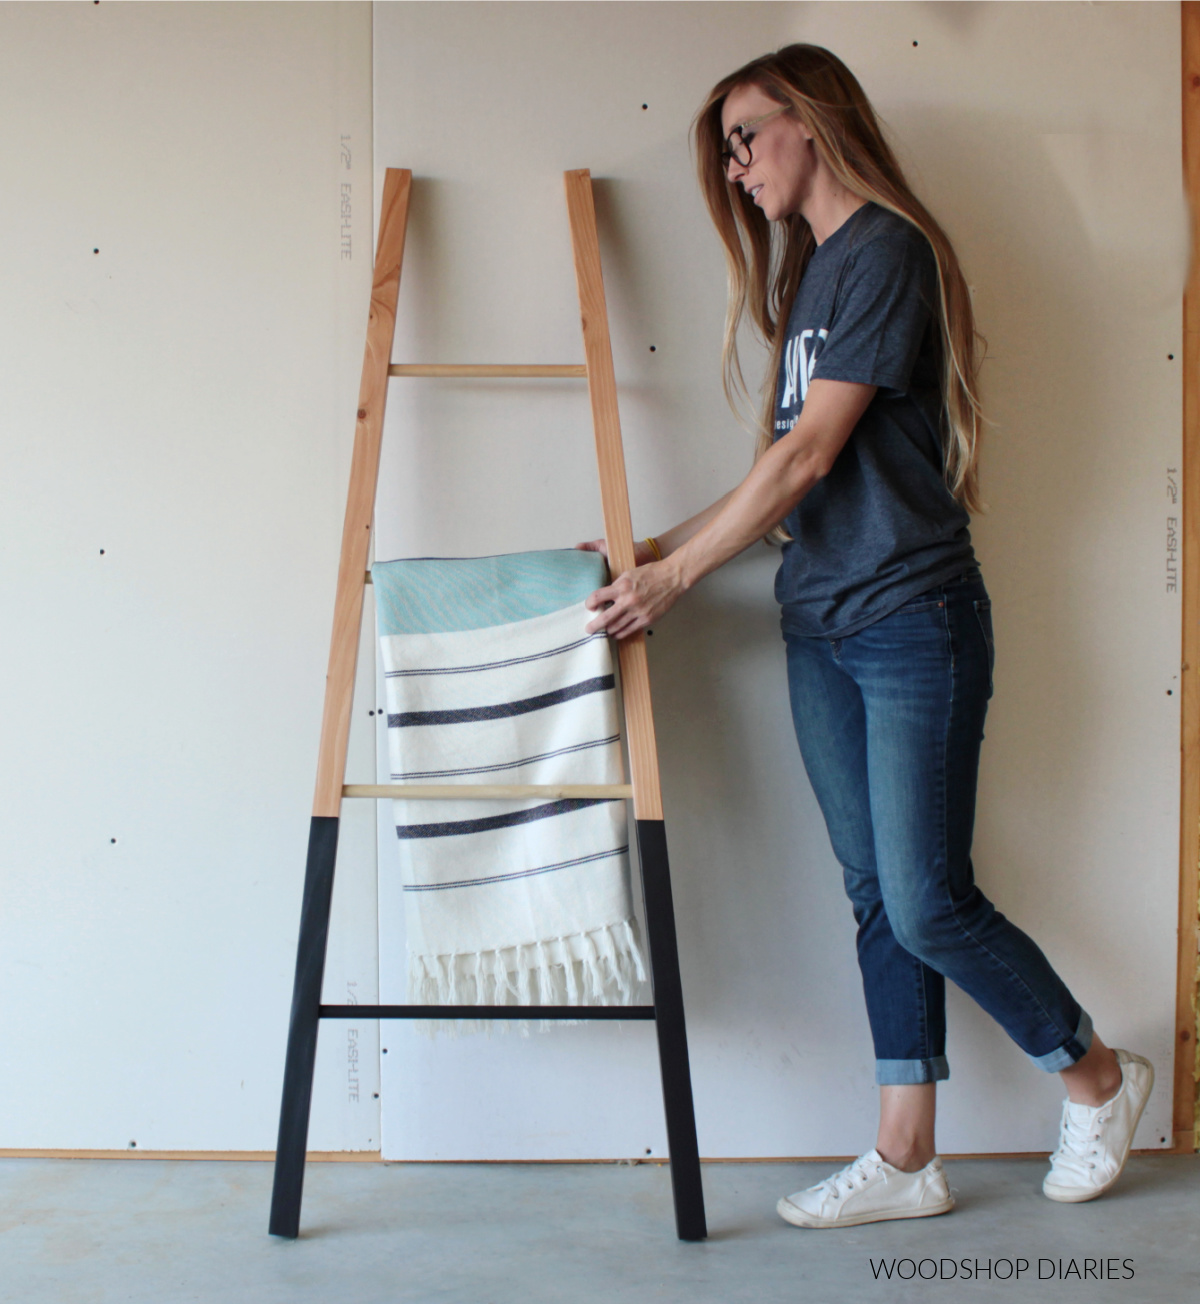 Shara Woodshop Diaries adjusting white and navy striped blanket on two tone DIY wooden blanket ladder